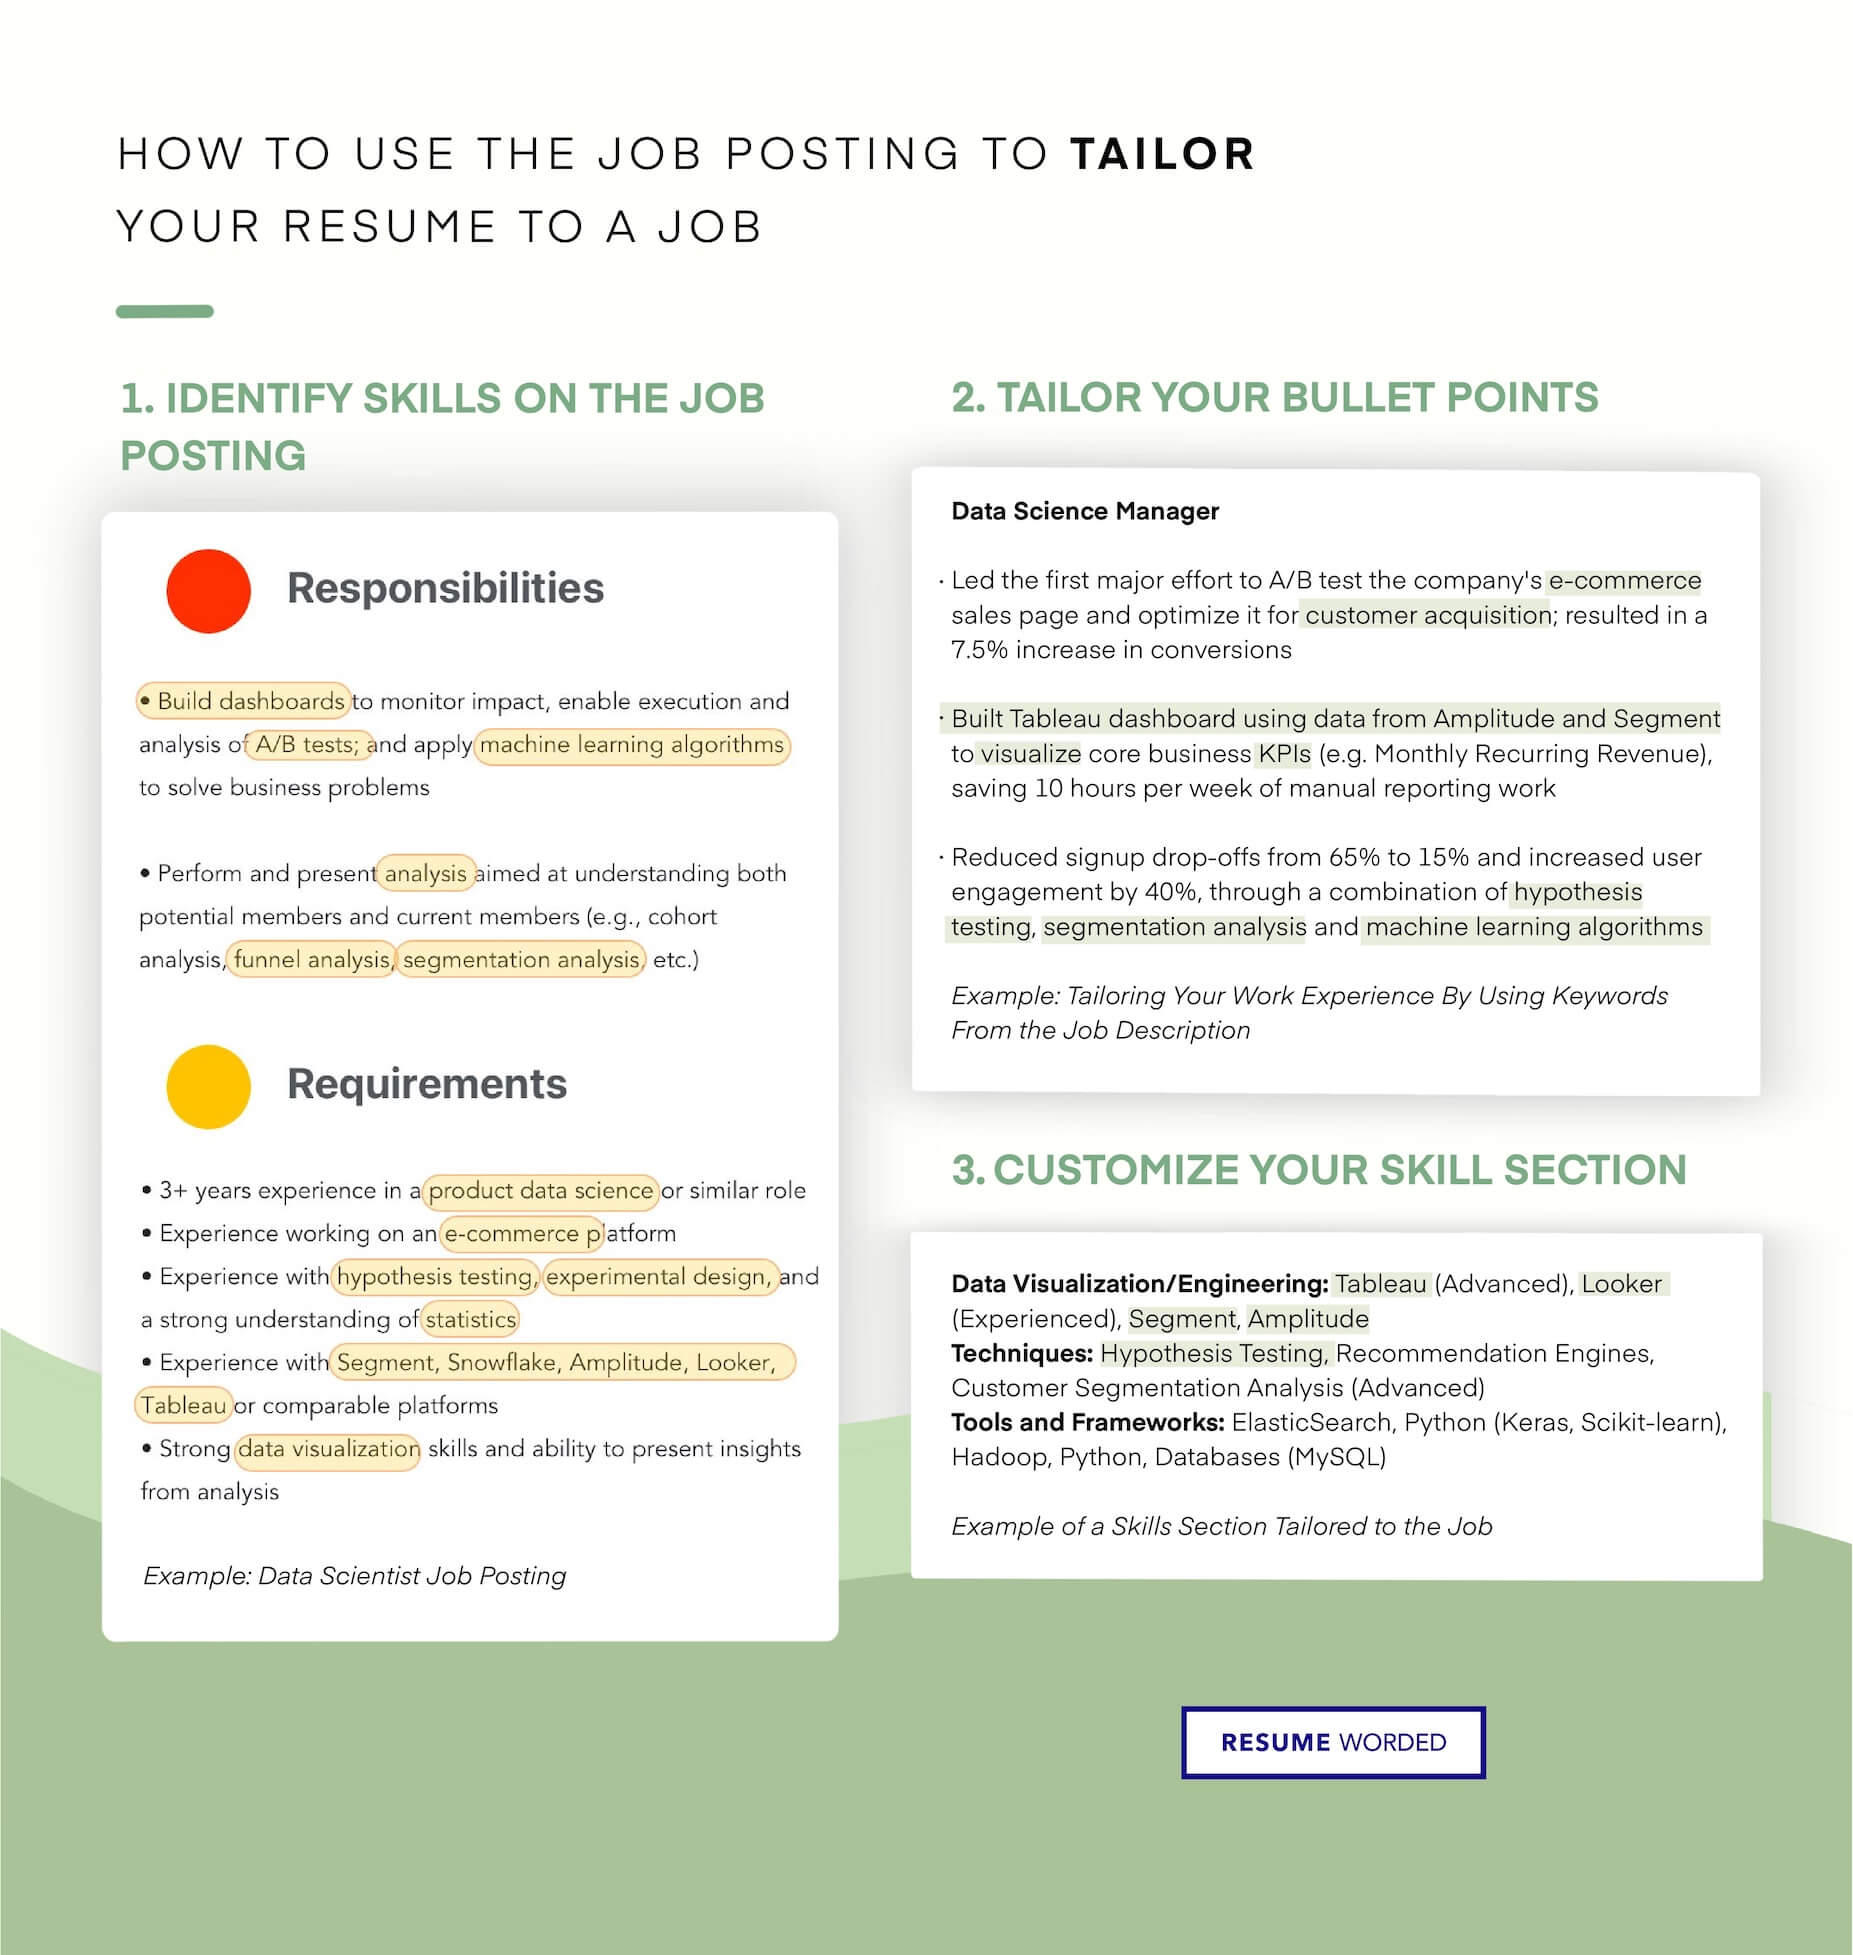 Tailor your resume to a specific industry